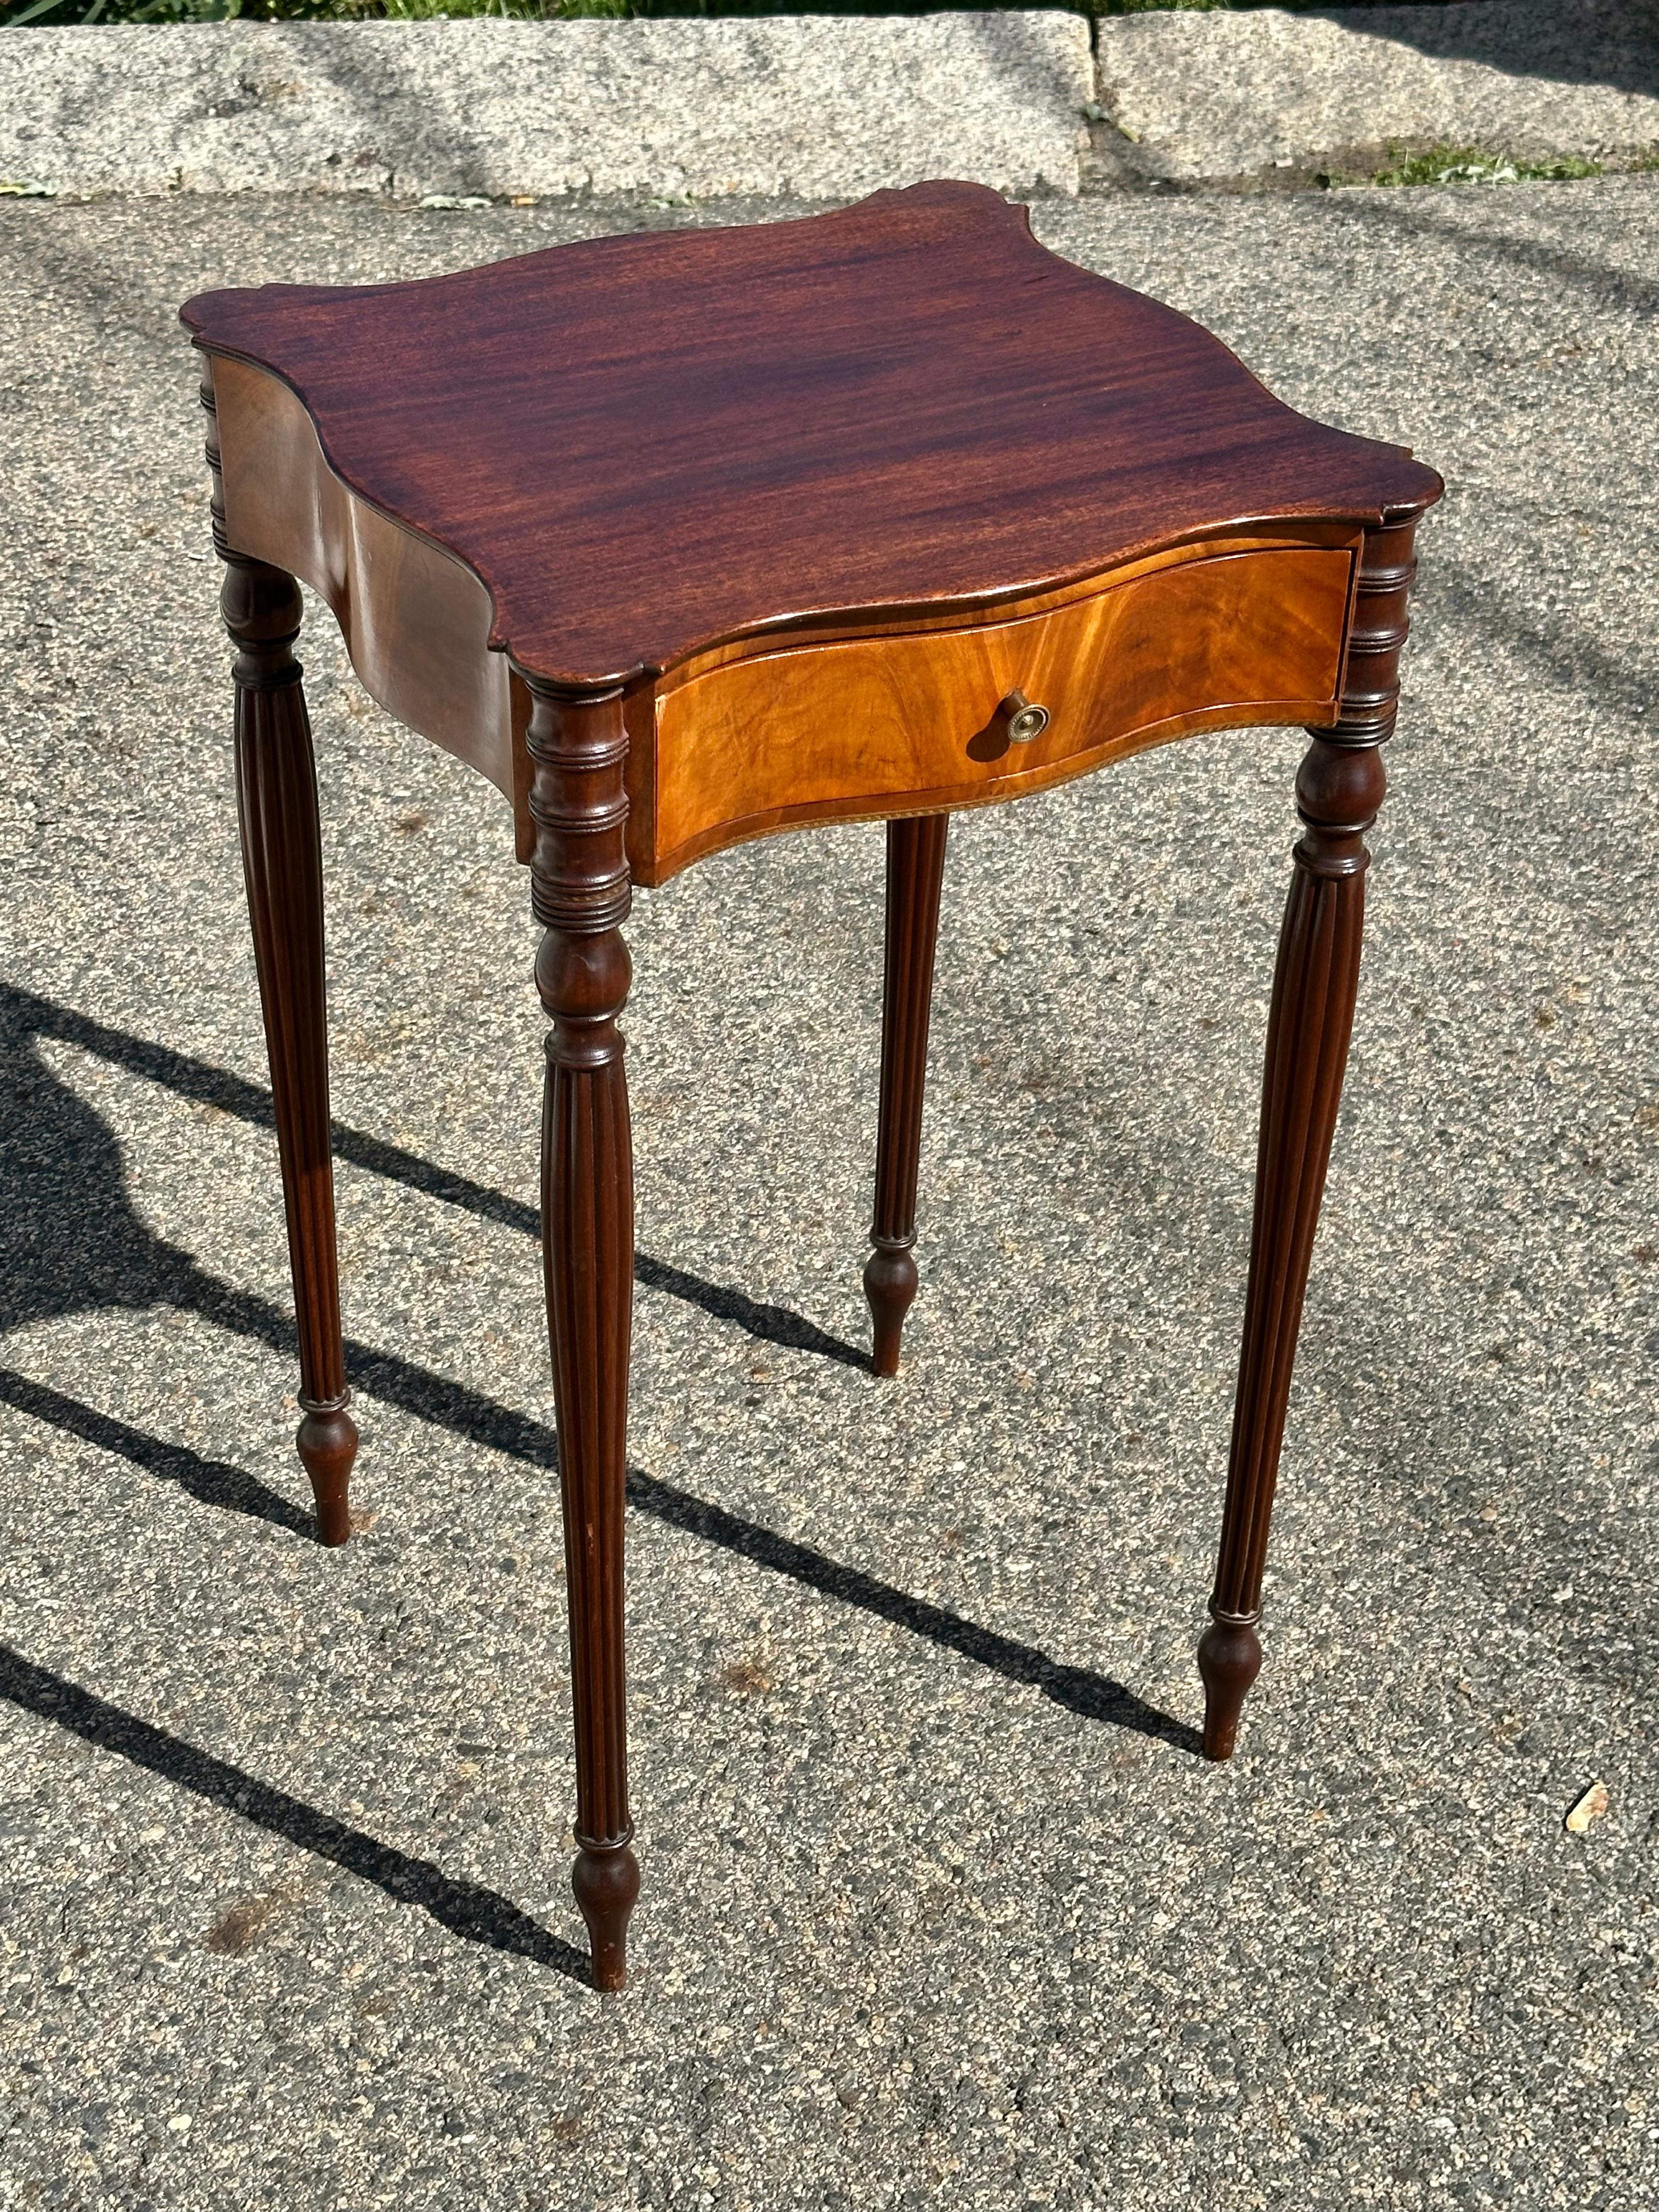 Pair of 19th Century American Federal Style Side Tables.  North Shore of Massachusetts.  Reeded tapered legs, cookie corner tops, decorative flame birch on all four serpentine sides.  Dovetailed drawer with pine secondary construction. 

Provenance: